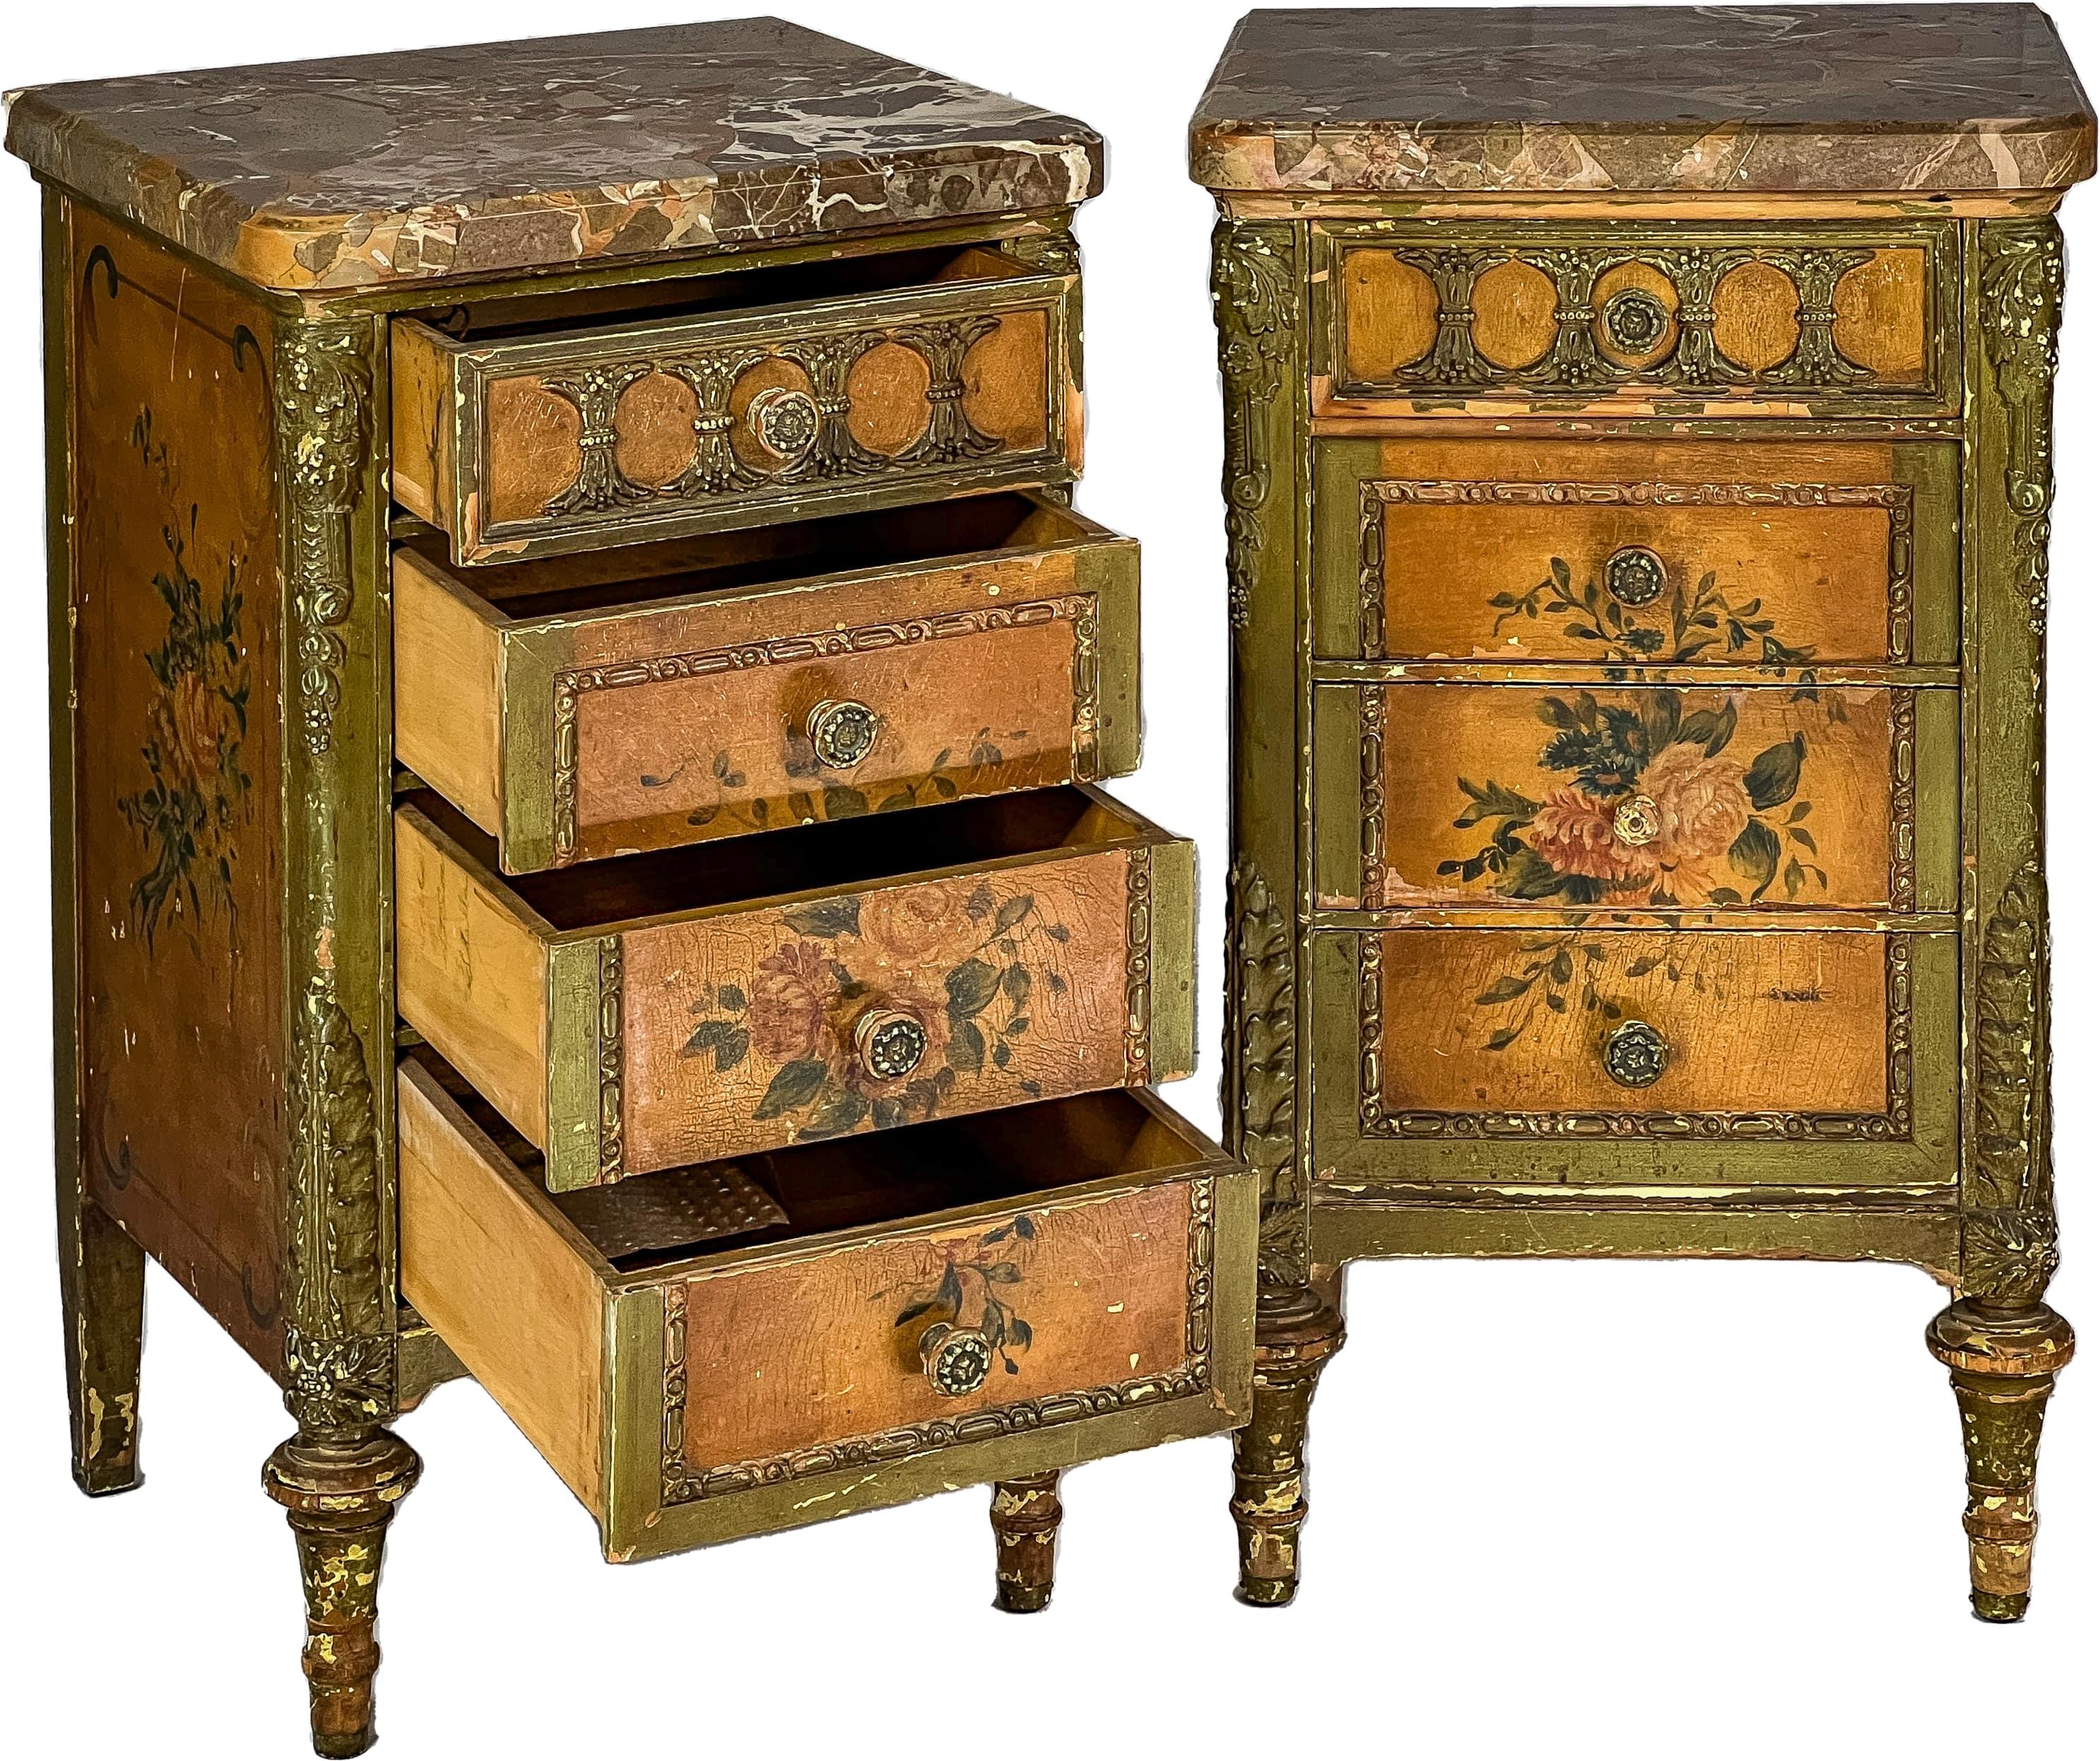 Fantastic pair of 19th c. antique painted commodes. These commodes have a beautiful removable marble top and a carved wood base with four drawers. All four drawers can be pulled out of the base.